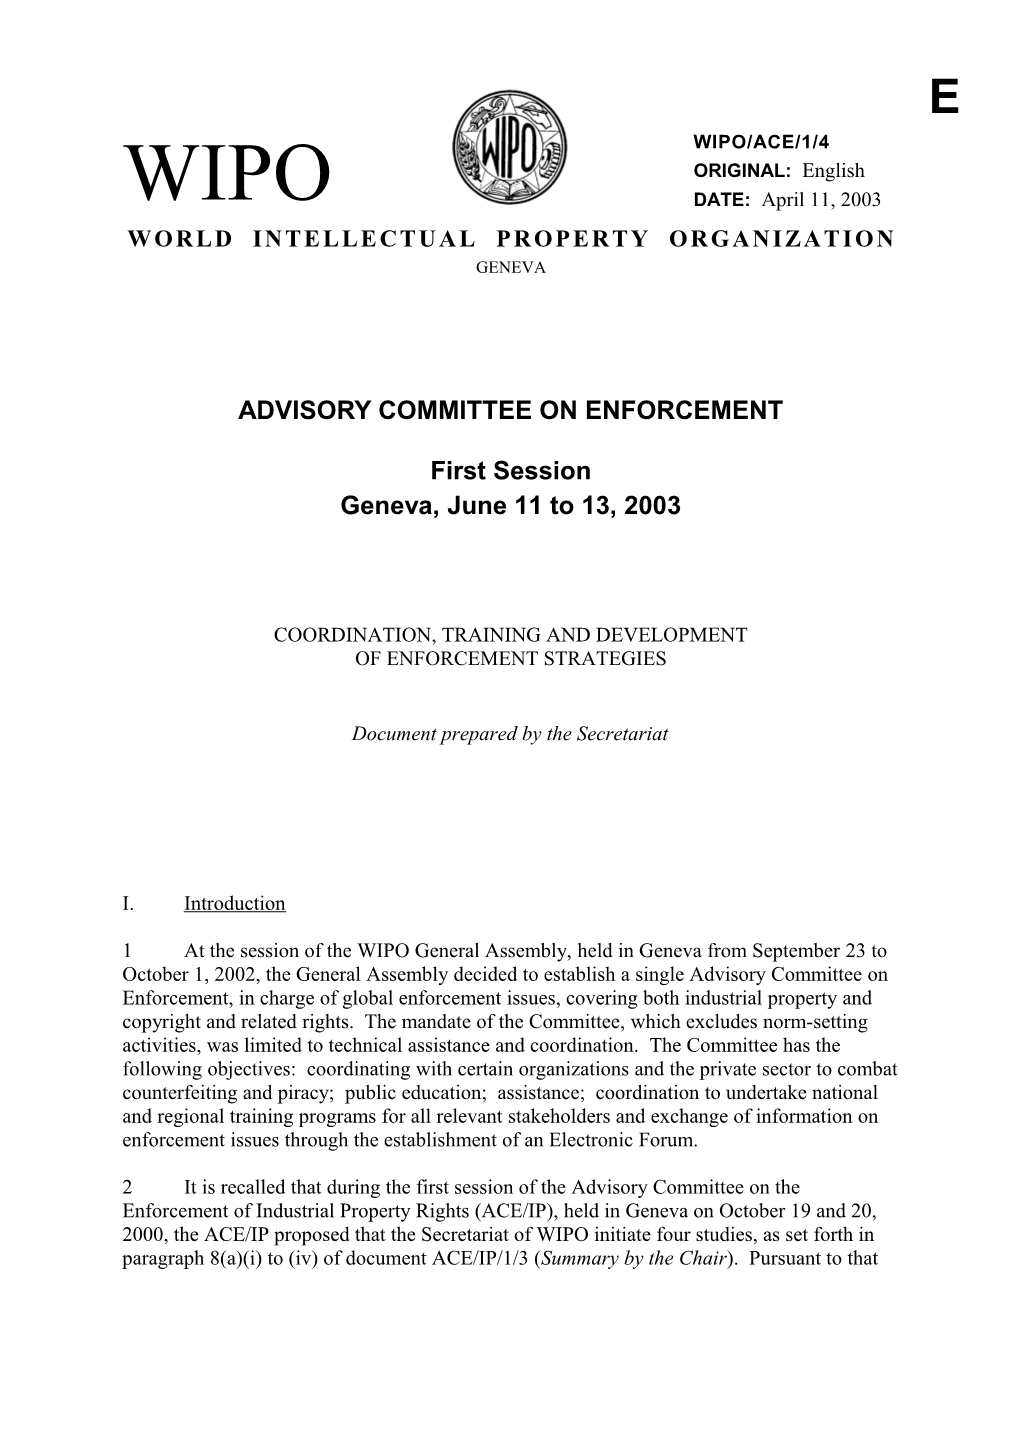 WIPO/ACE/1/4: Coordination, Training and Development of Enforcement Strategies (Main)